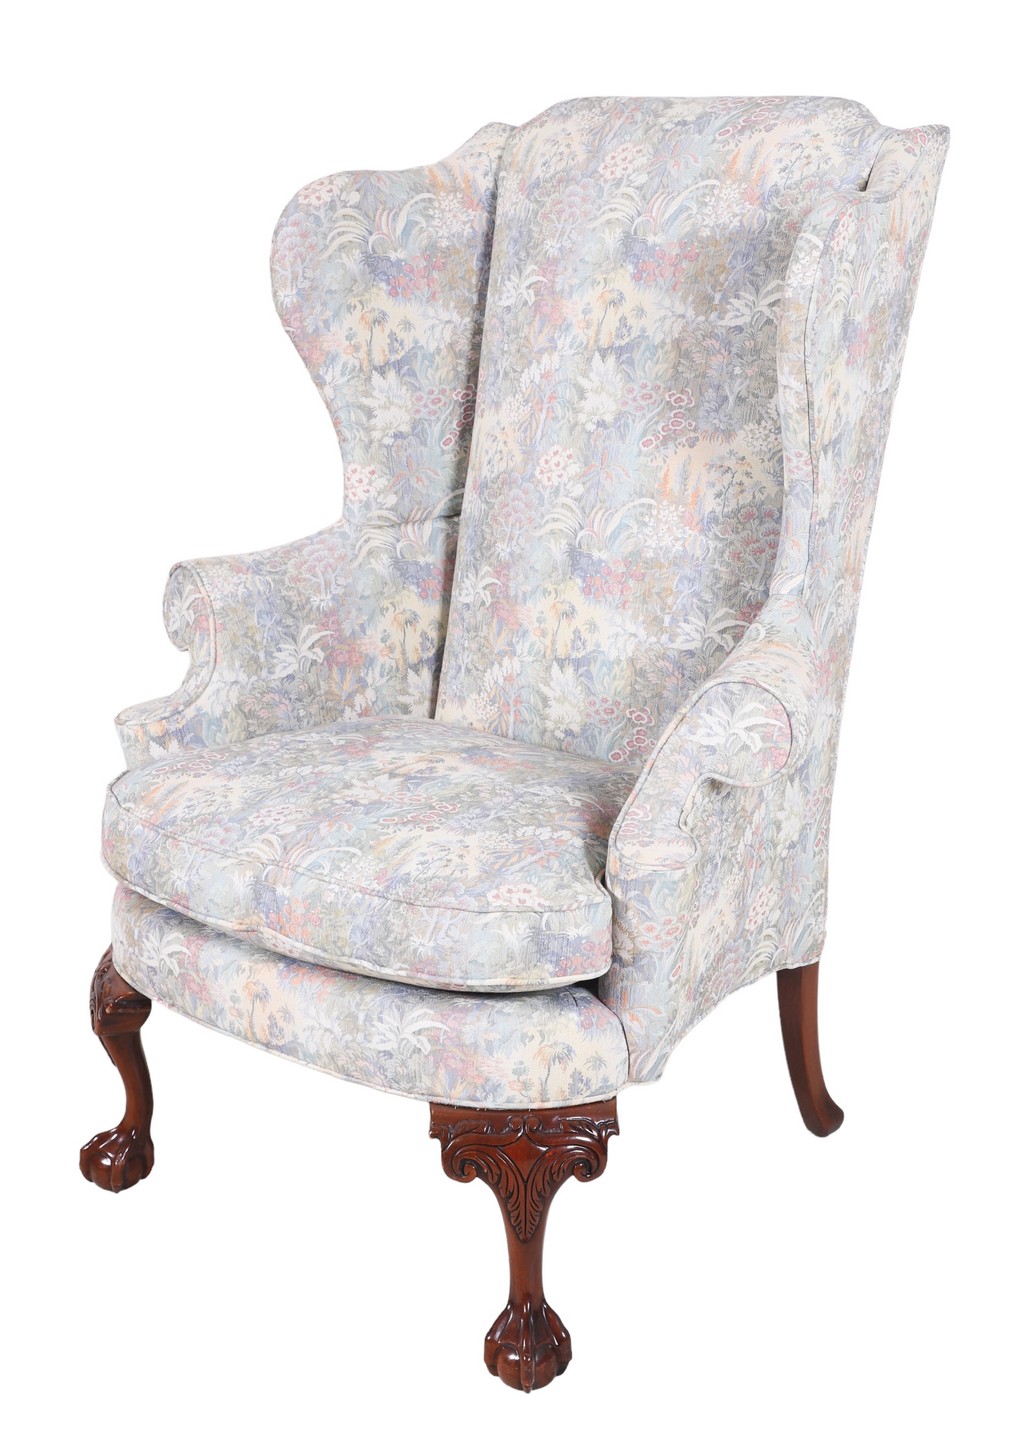 JJ Holley Chippendale style upholstered 27a516